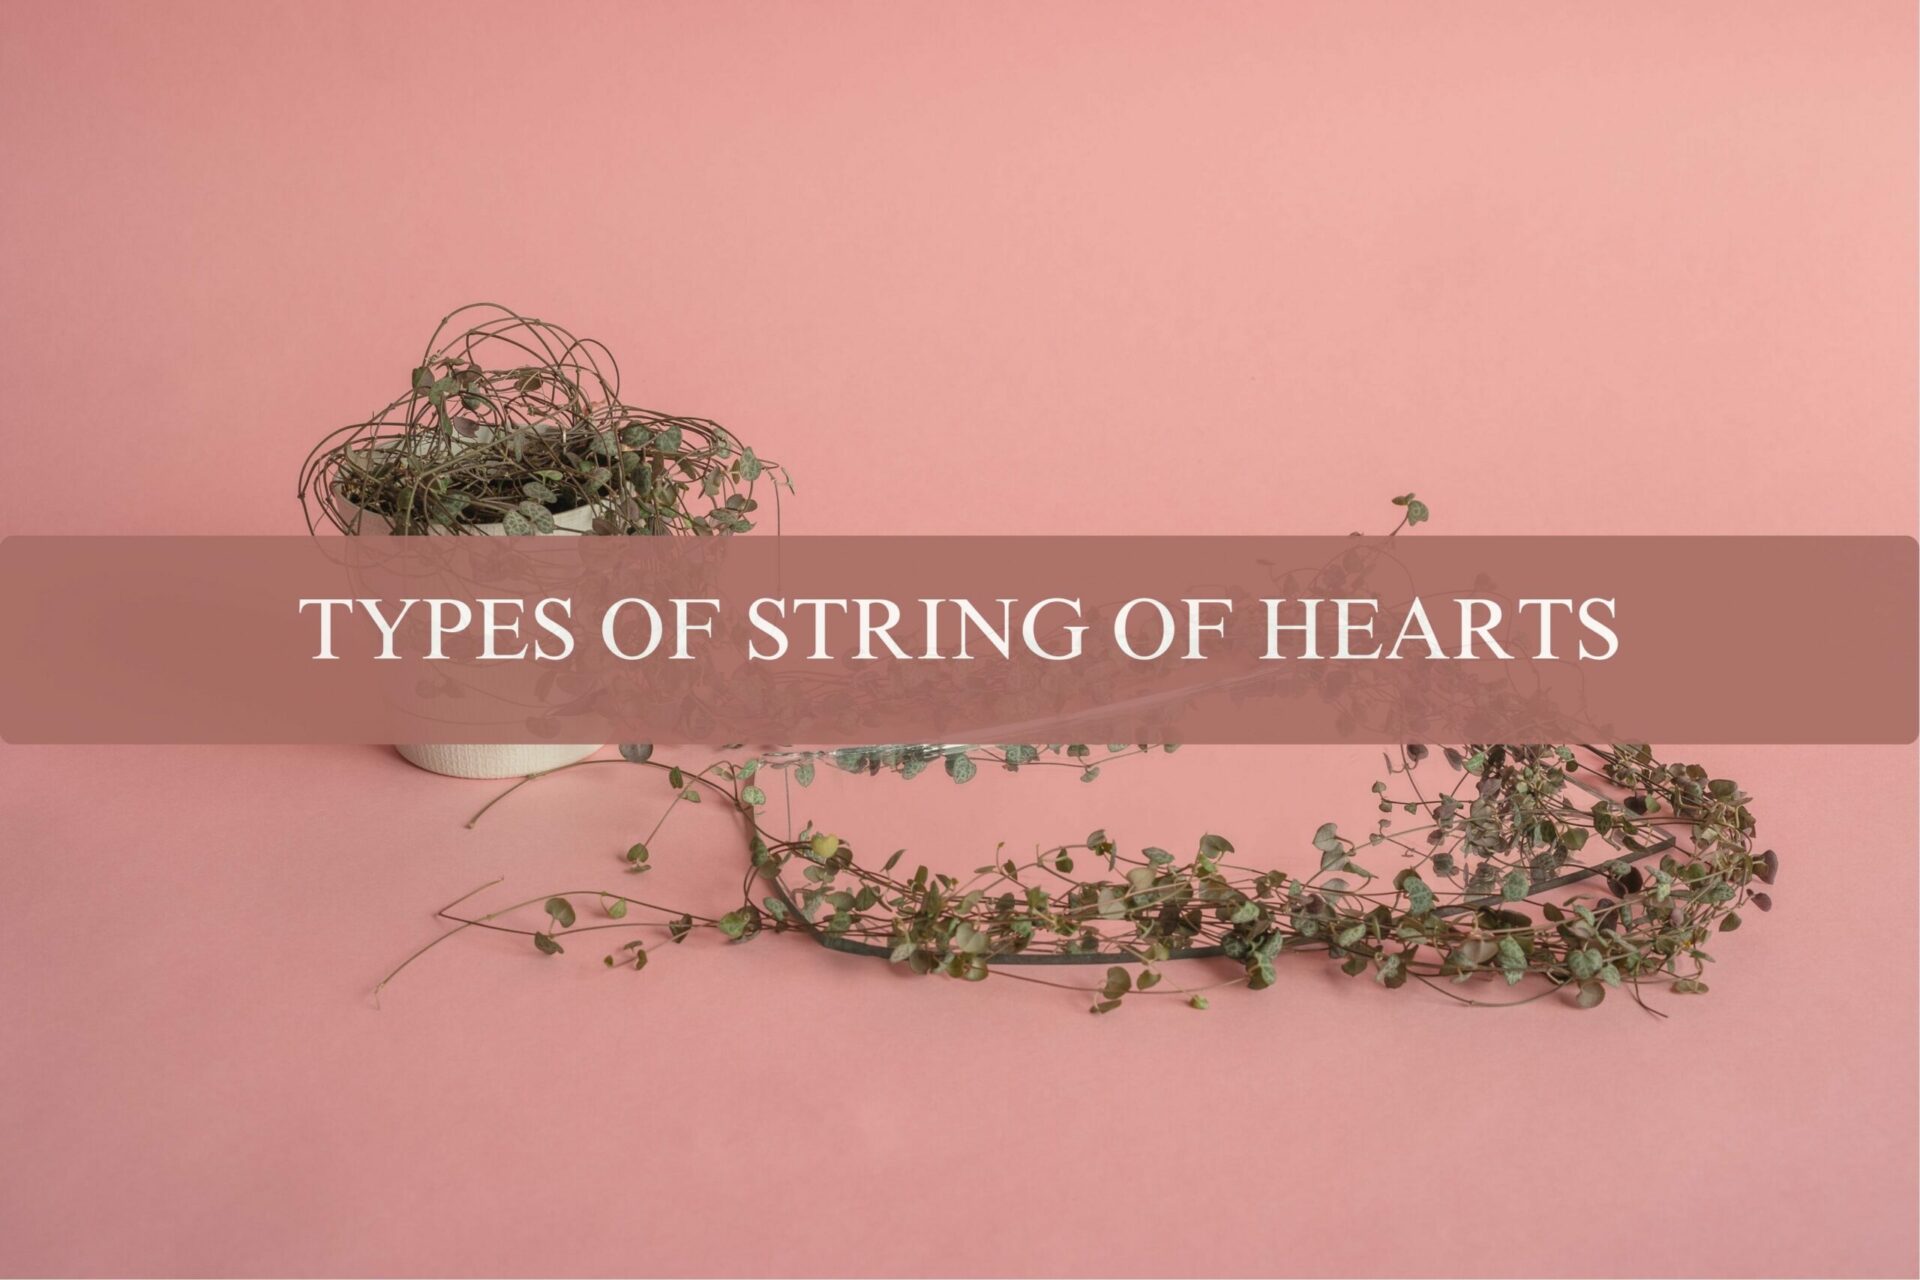 TYPES OF STRING OF HEARTS